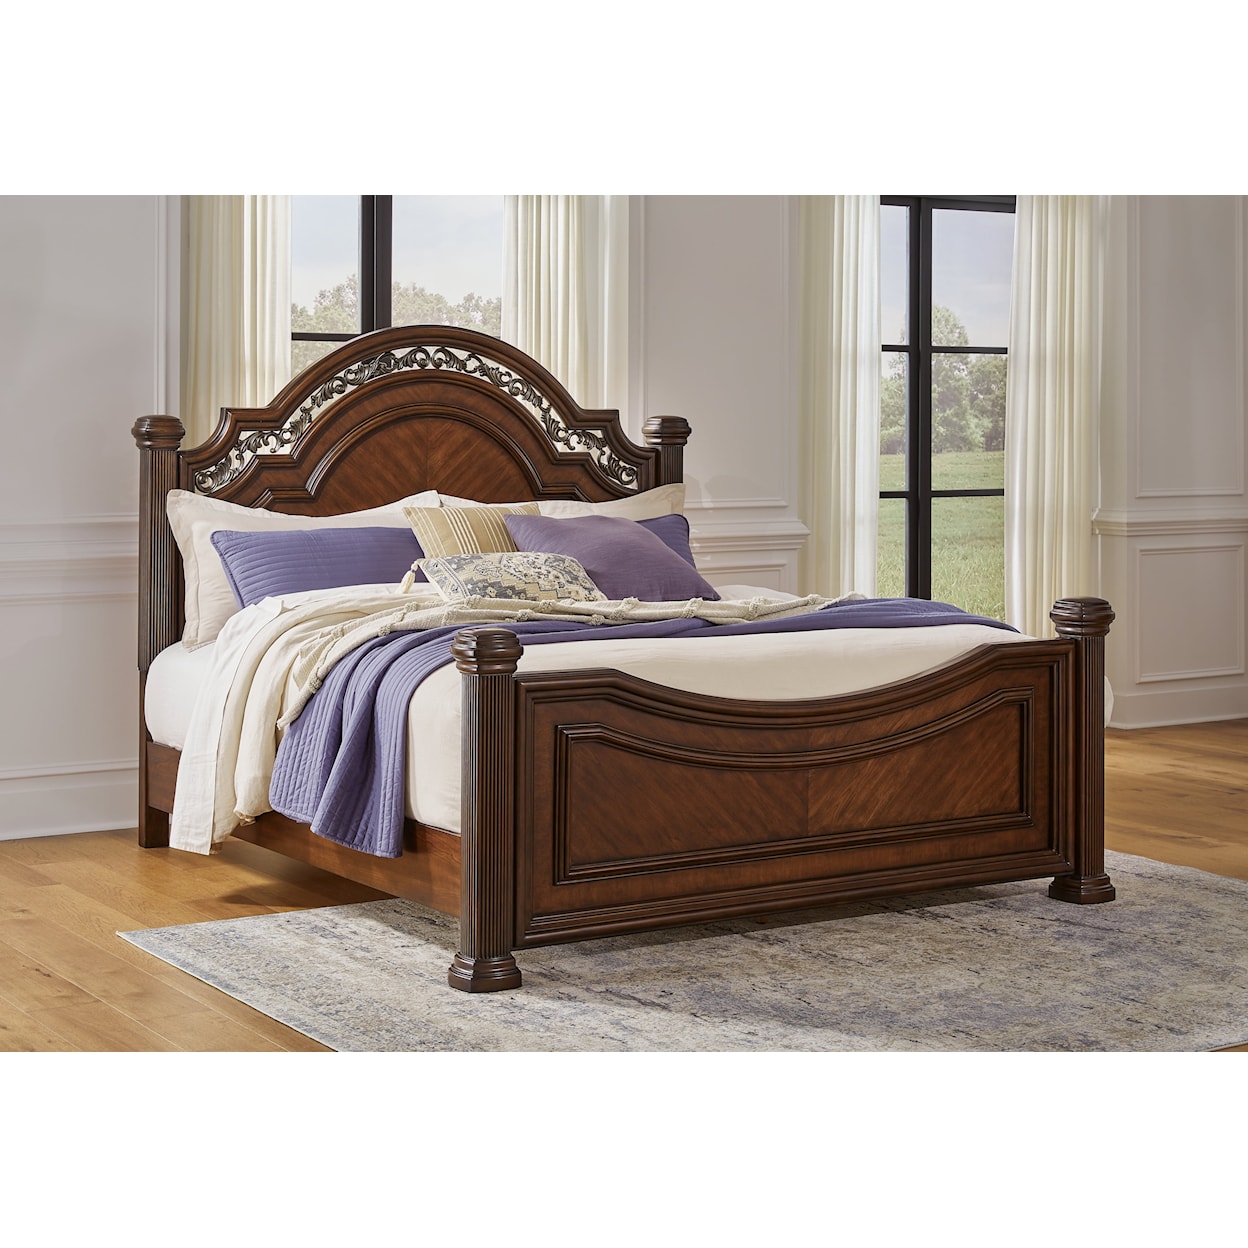 Signature Design by Ashley Furniture Lavinton Queen Poster Bed